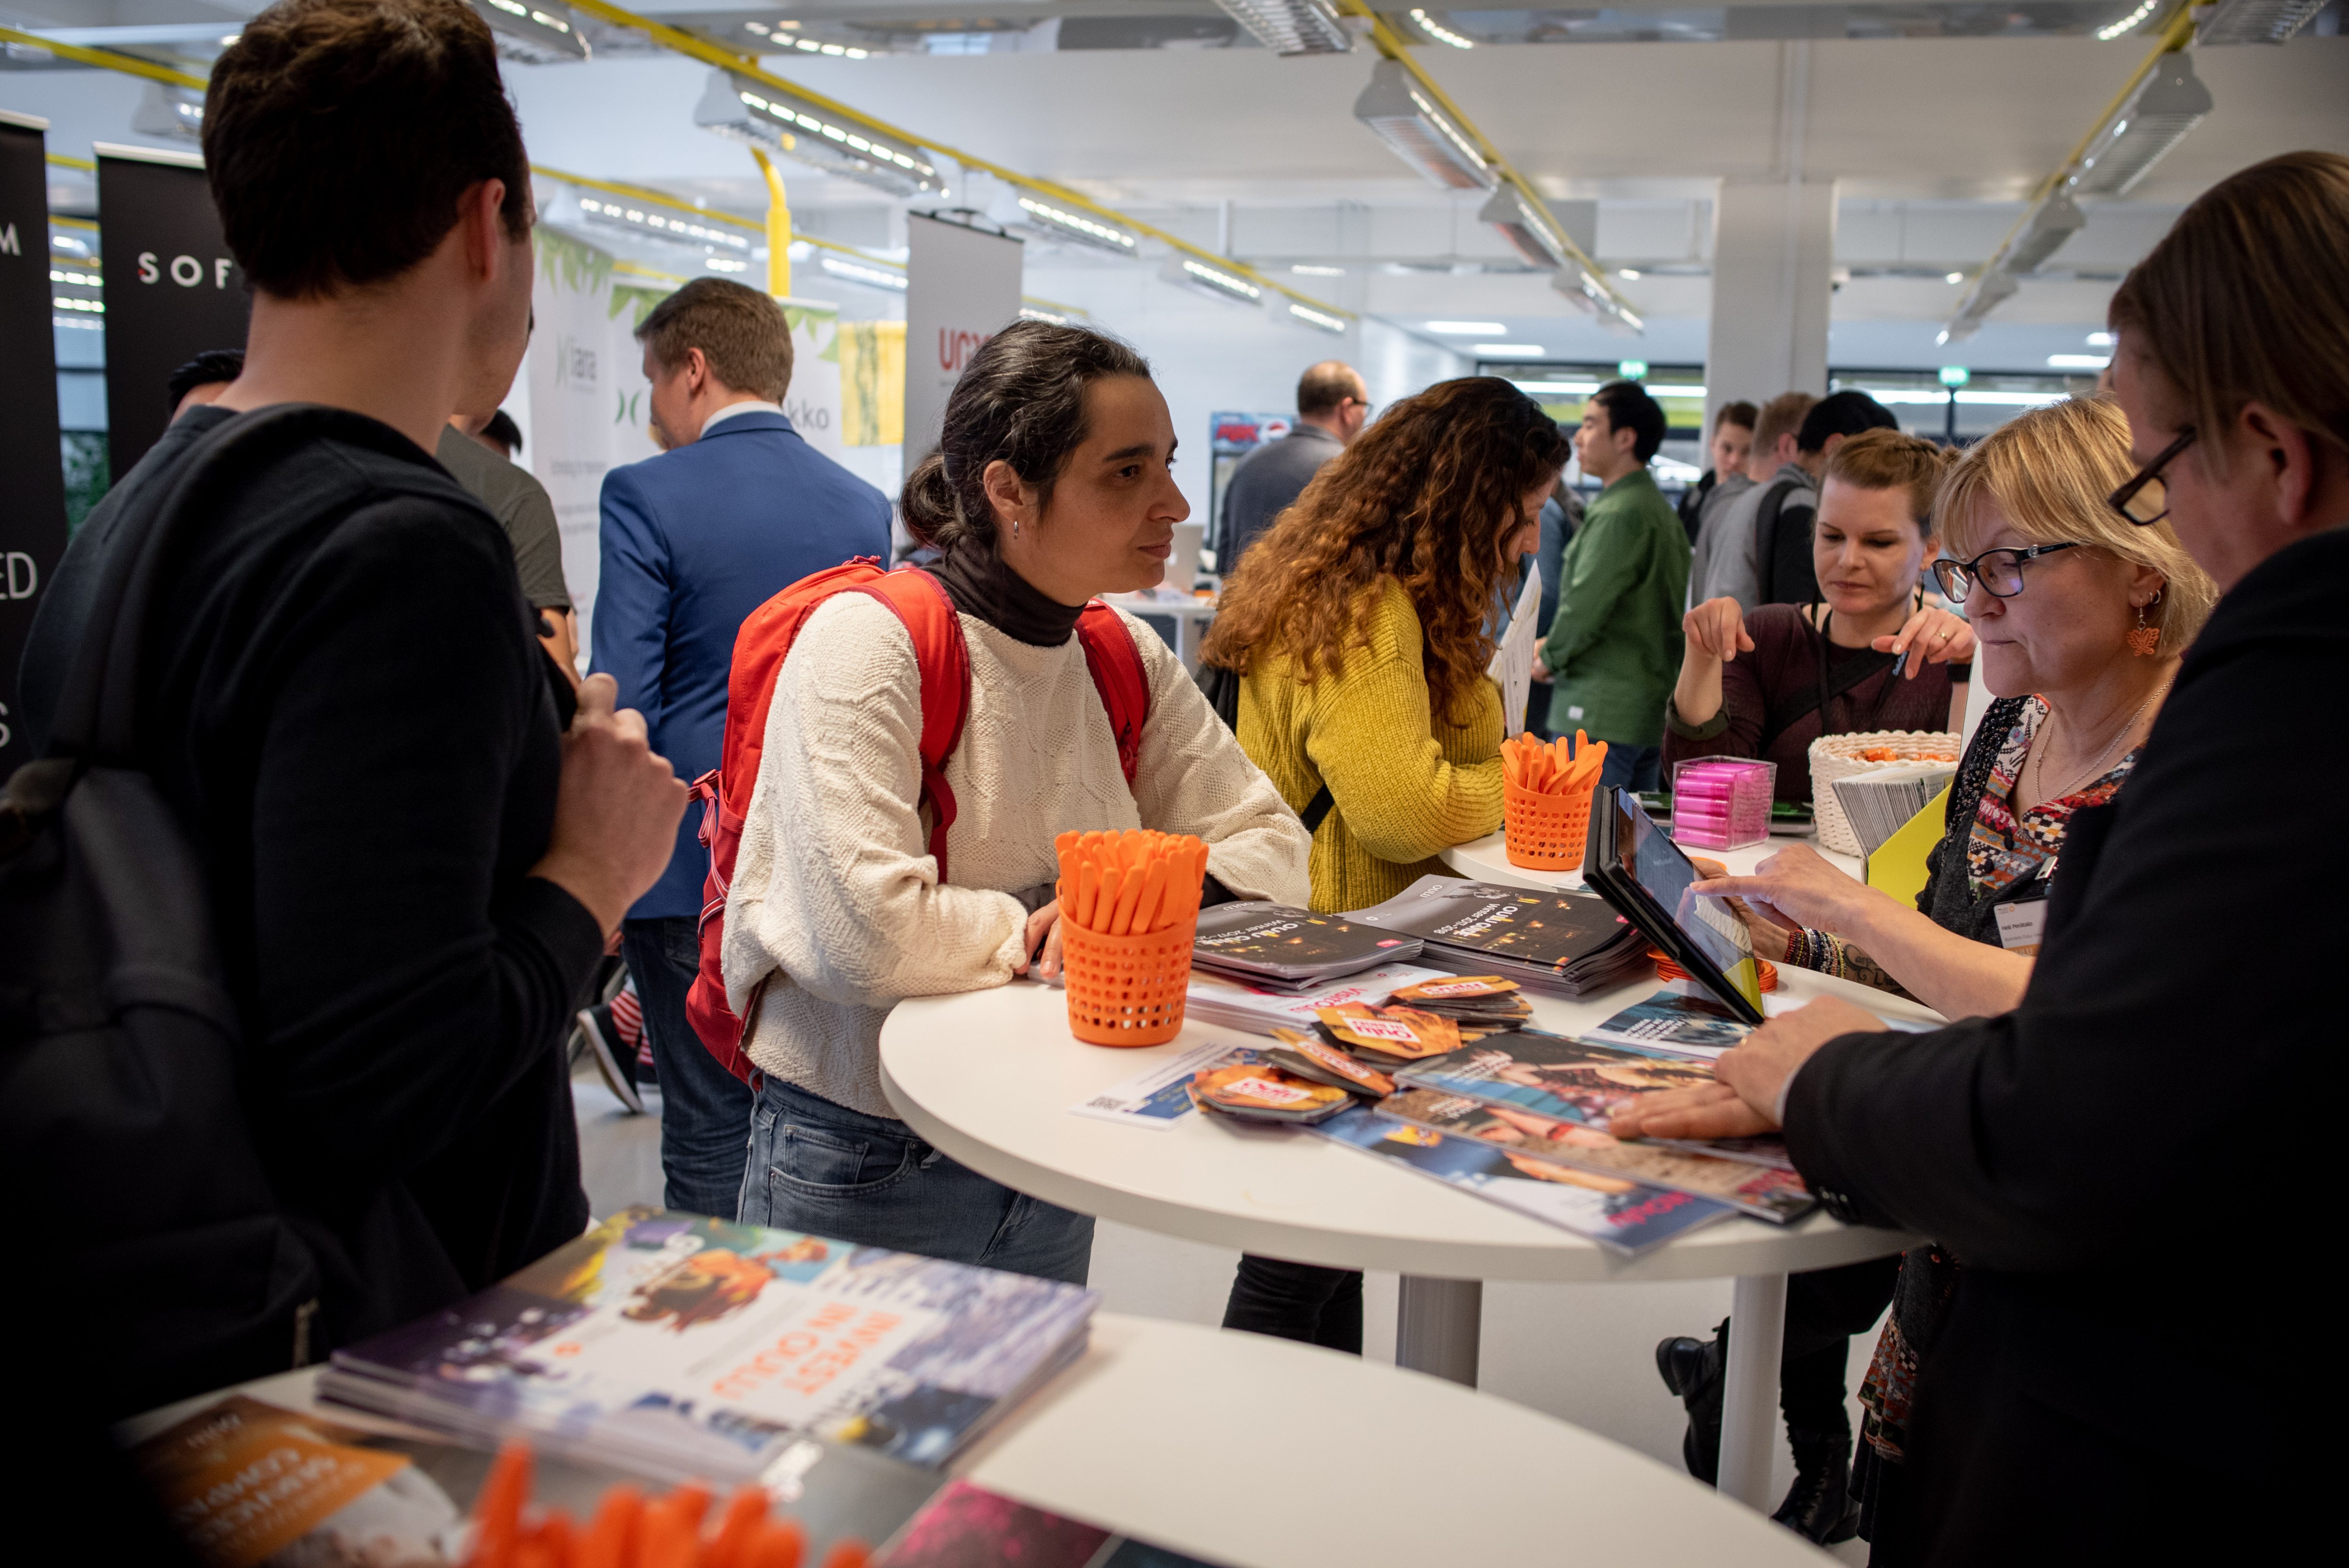 International students want to know about practical things regarding finding a job, says Katariina Sarja, the project coordinator of Löyly, a two-day employment event for both international and non-international students in Oulu. Picture from last year’s Löyly job fair.